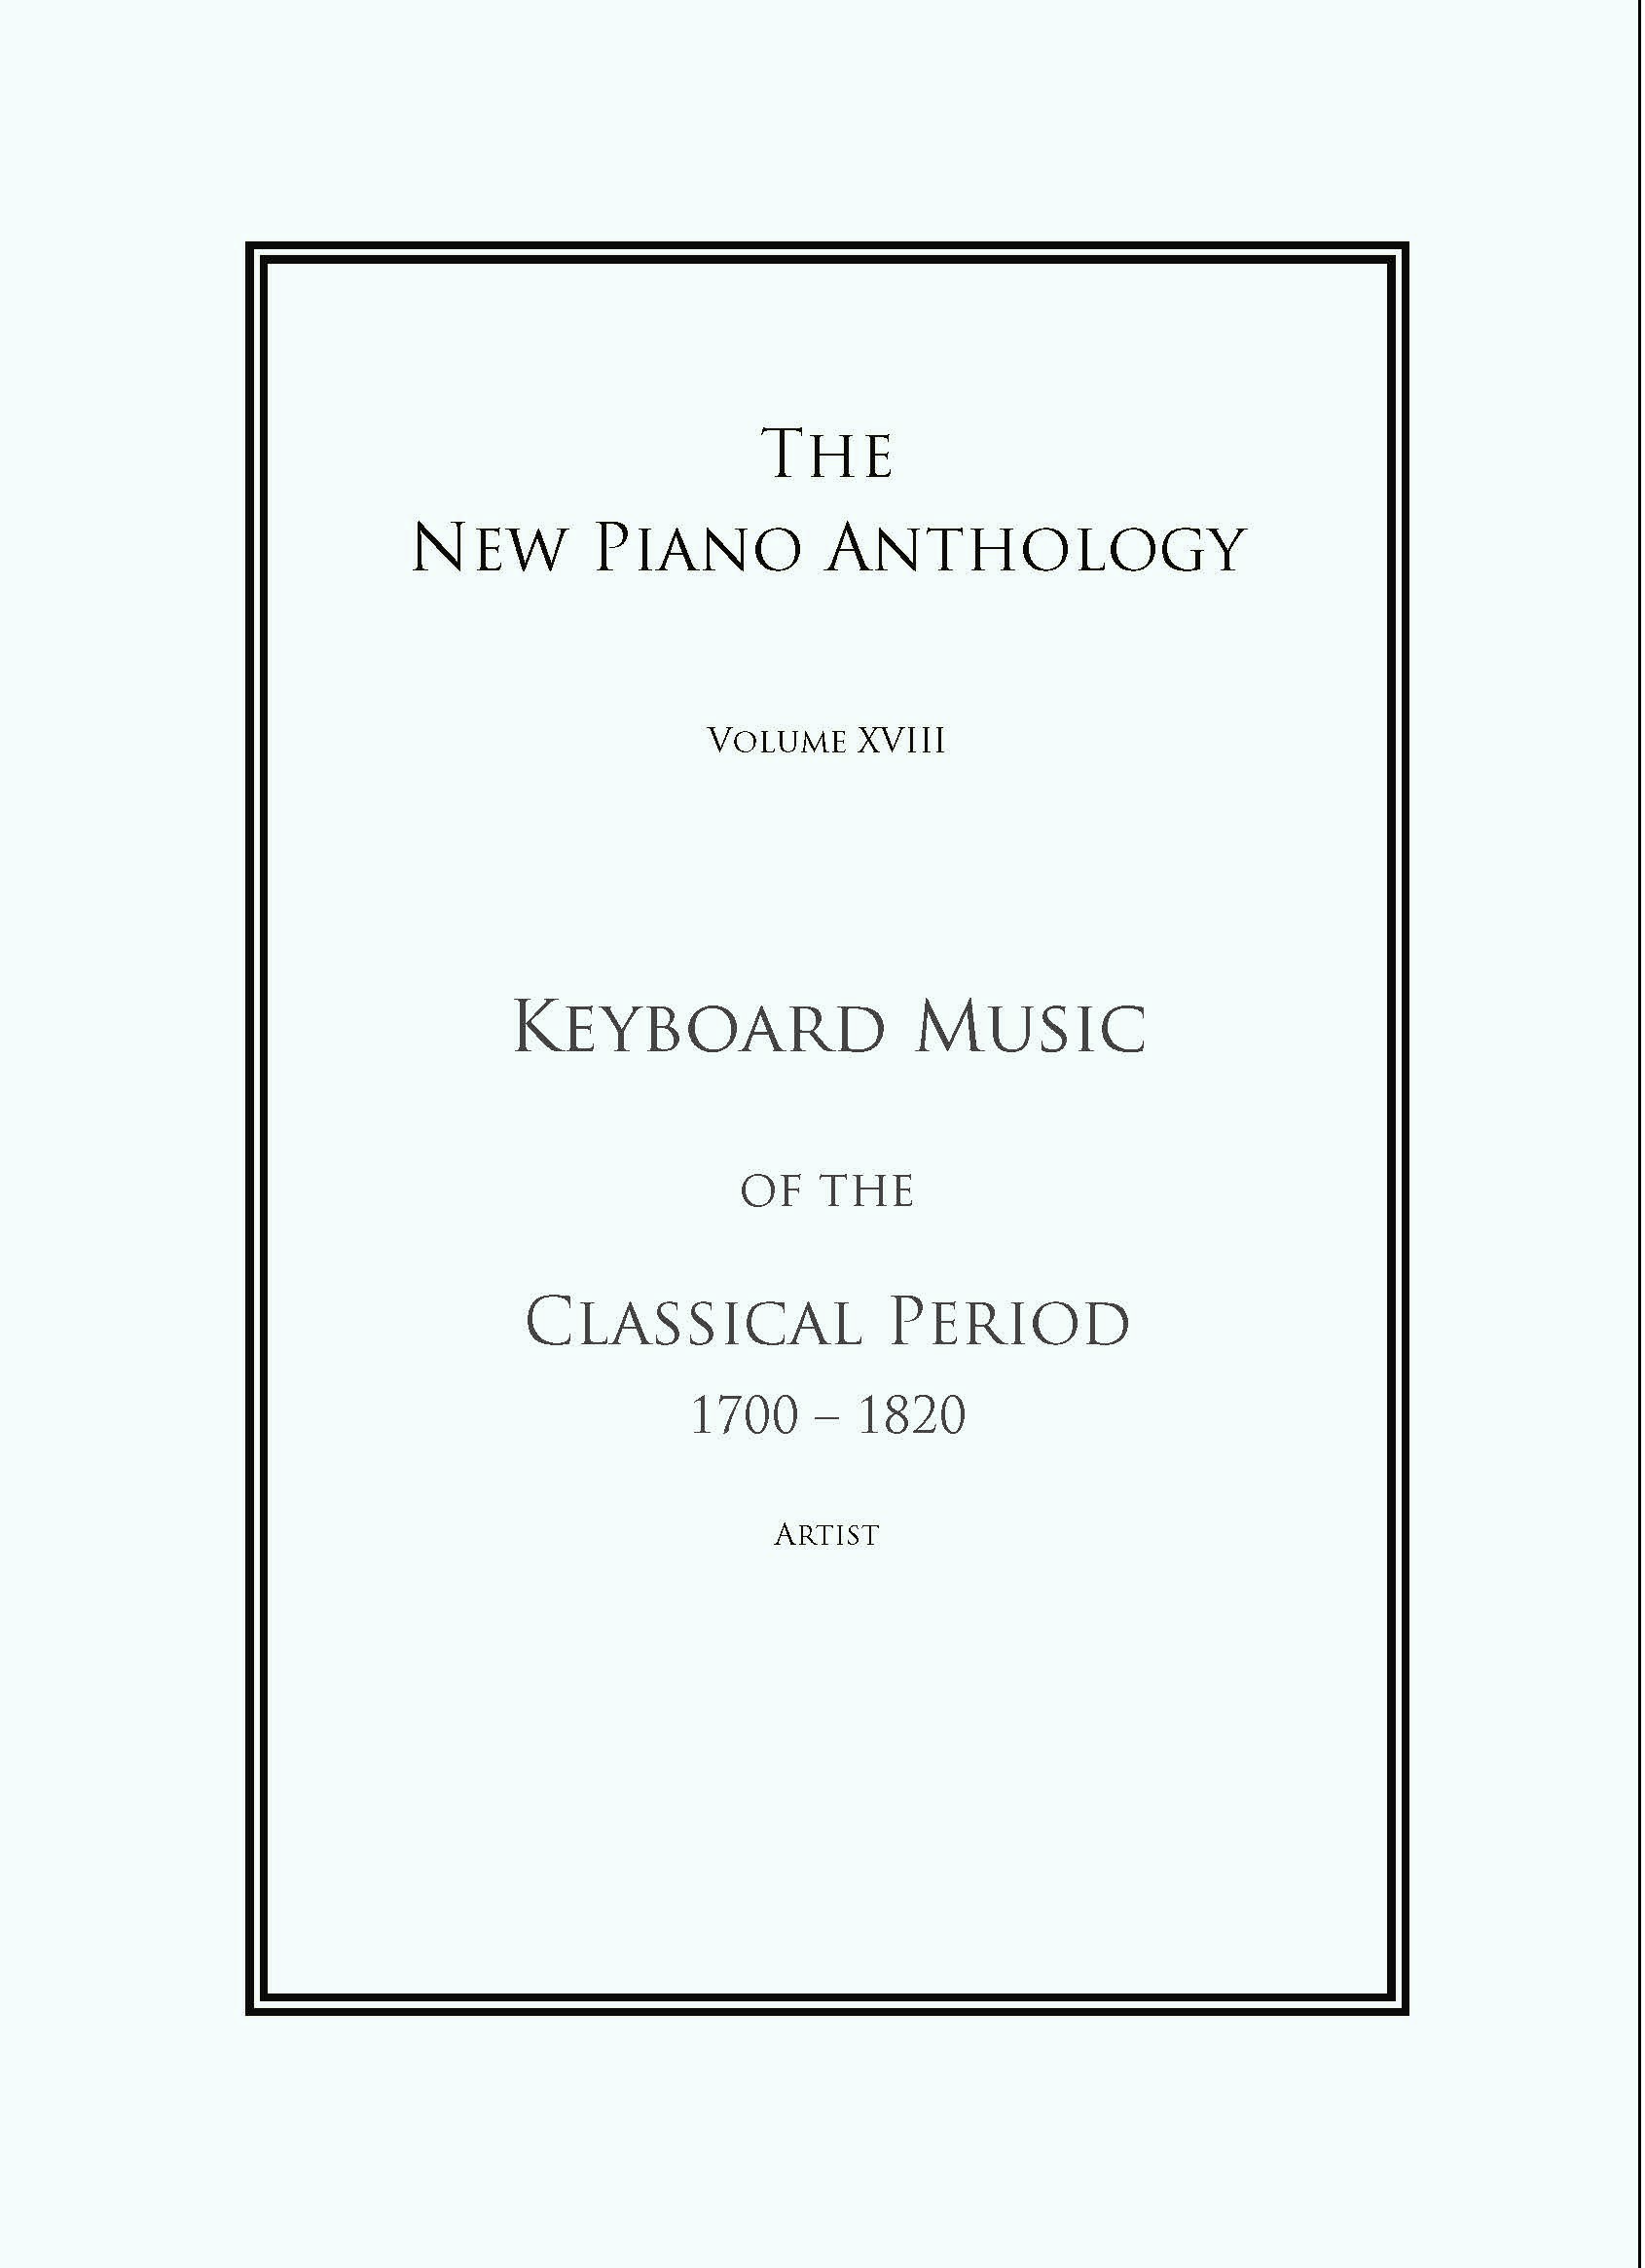 Keyboard Music of the Classical Period (Artist)